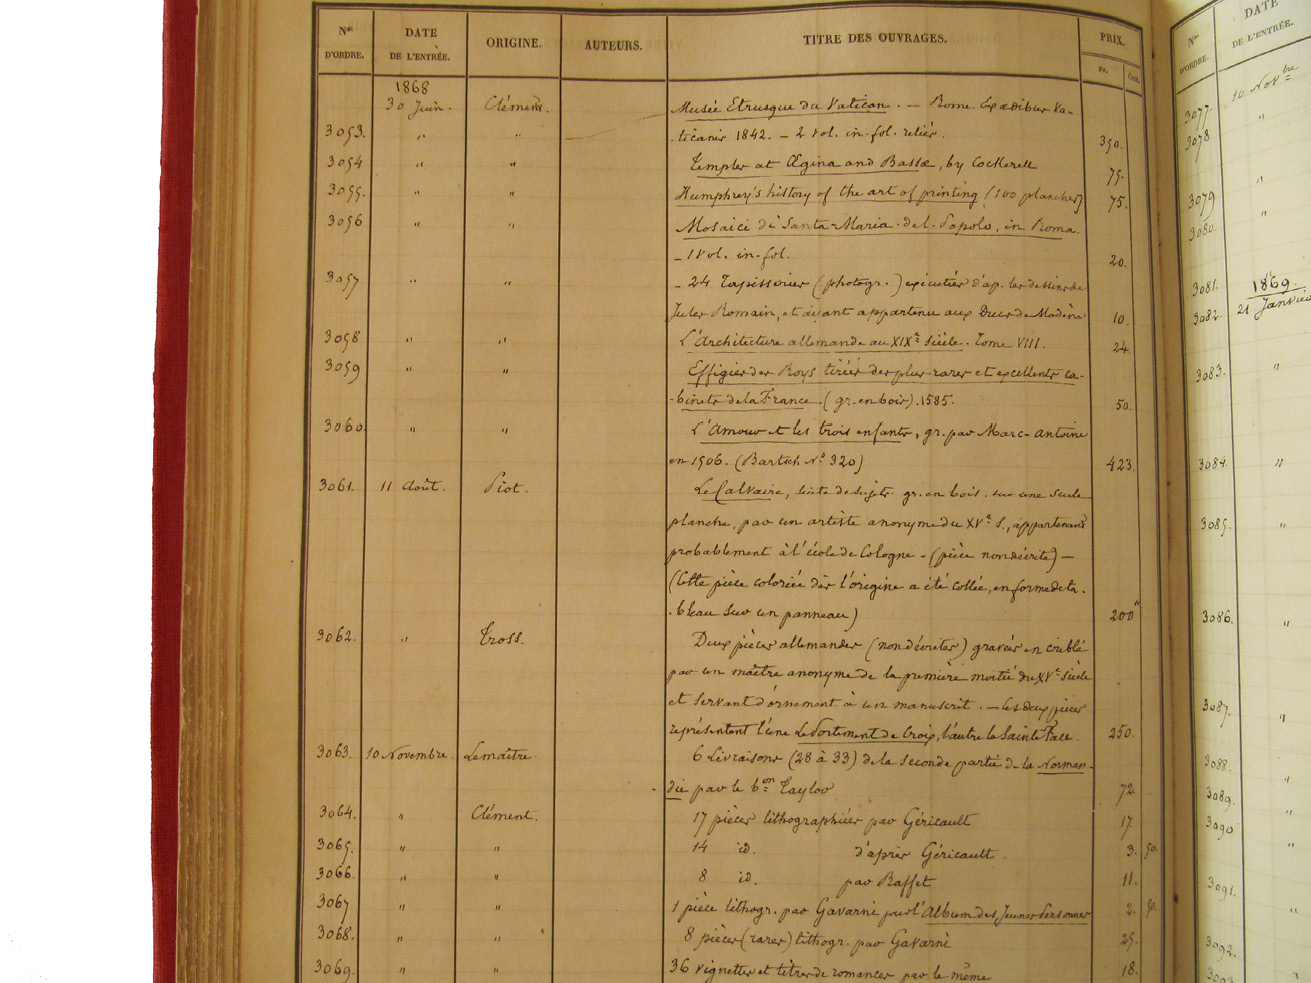 Fig. 76  Handwritten list of acquisitions from the nineteenth century, for 11 August 1868, in the BnF.